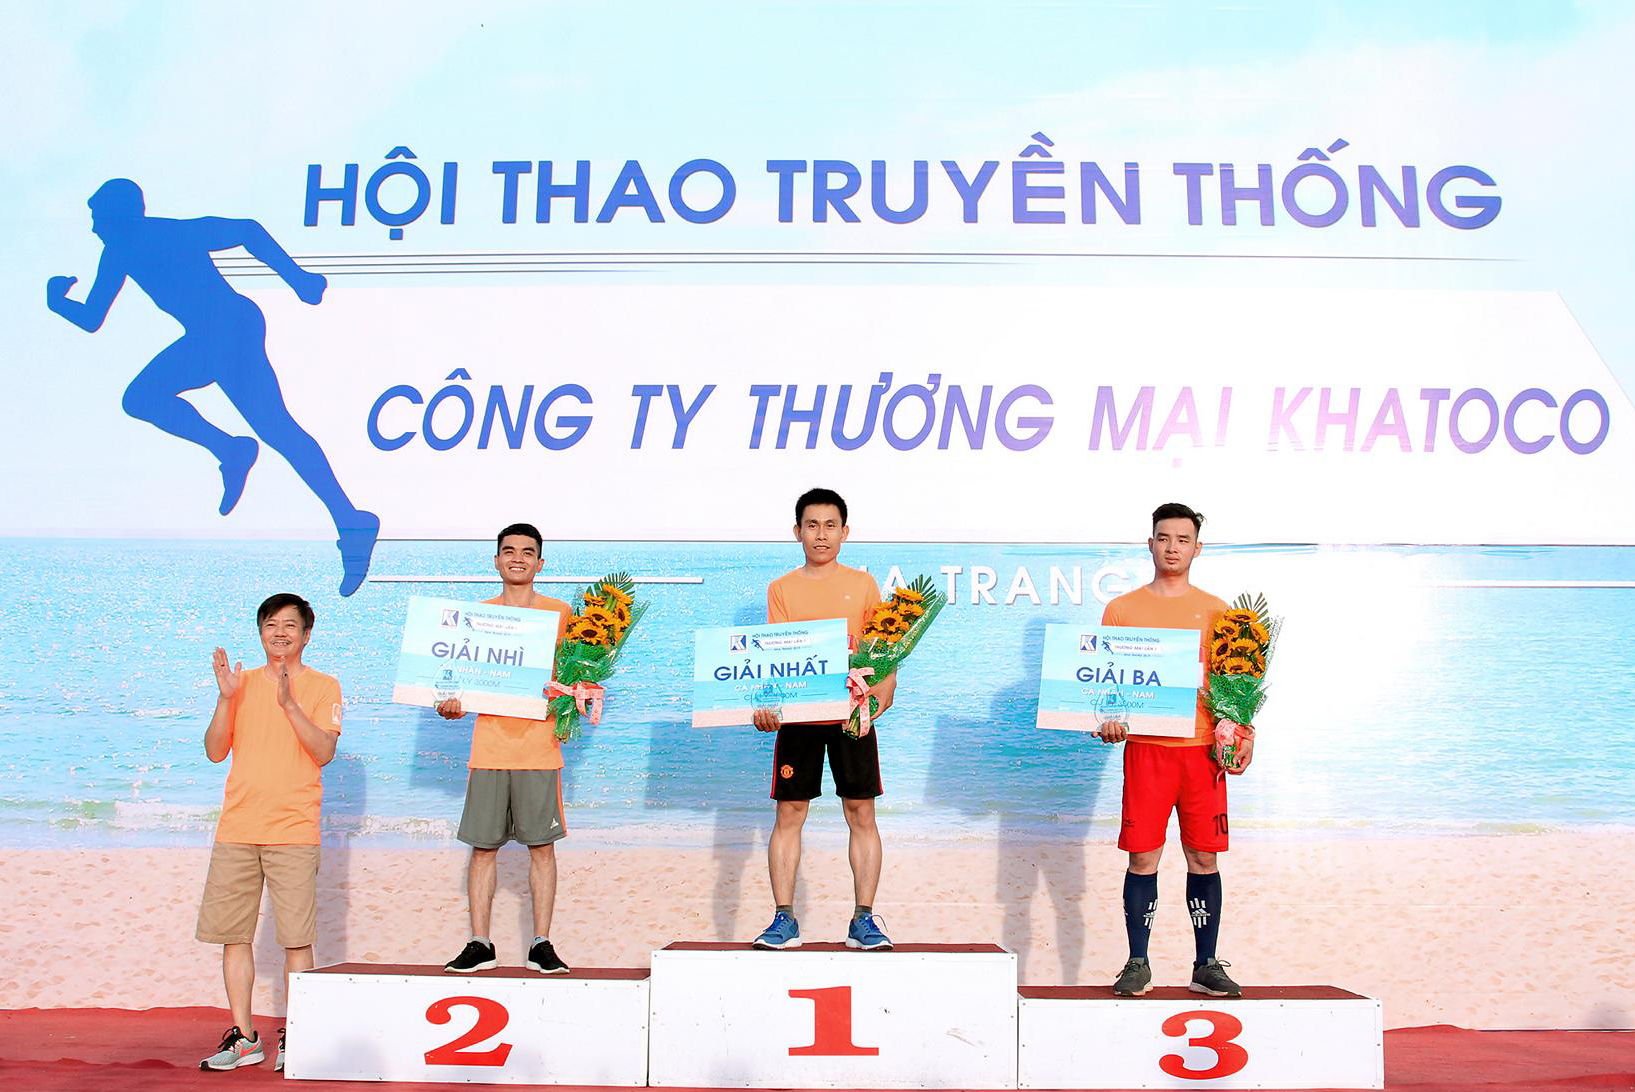 Le Tien Anh, CEO of Khanh Viet Corporation, and winners of men’s 3km run 